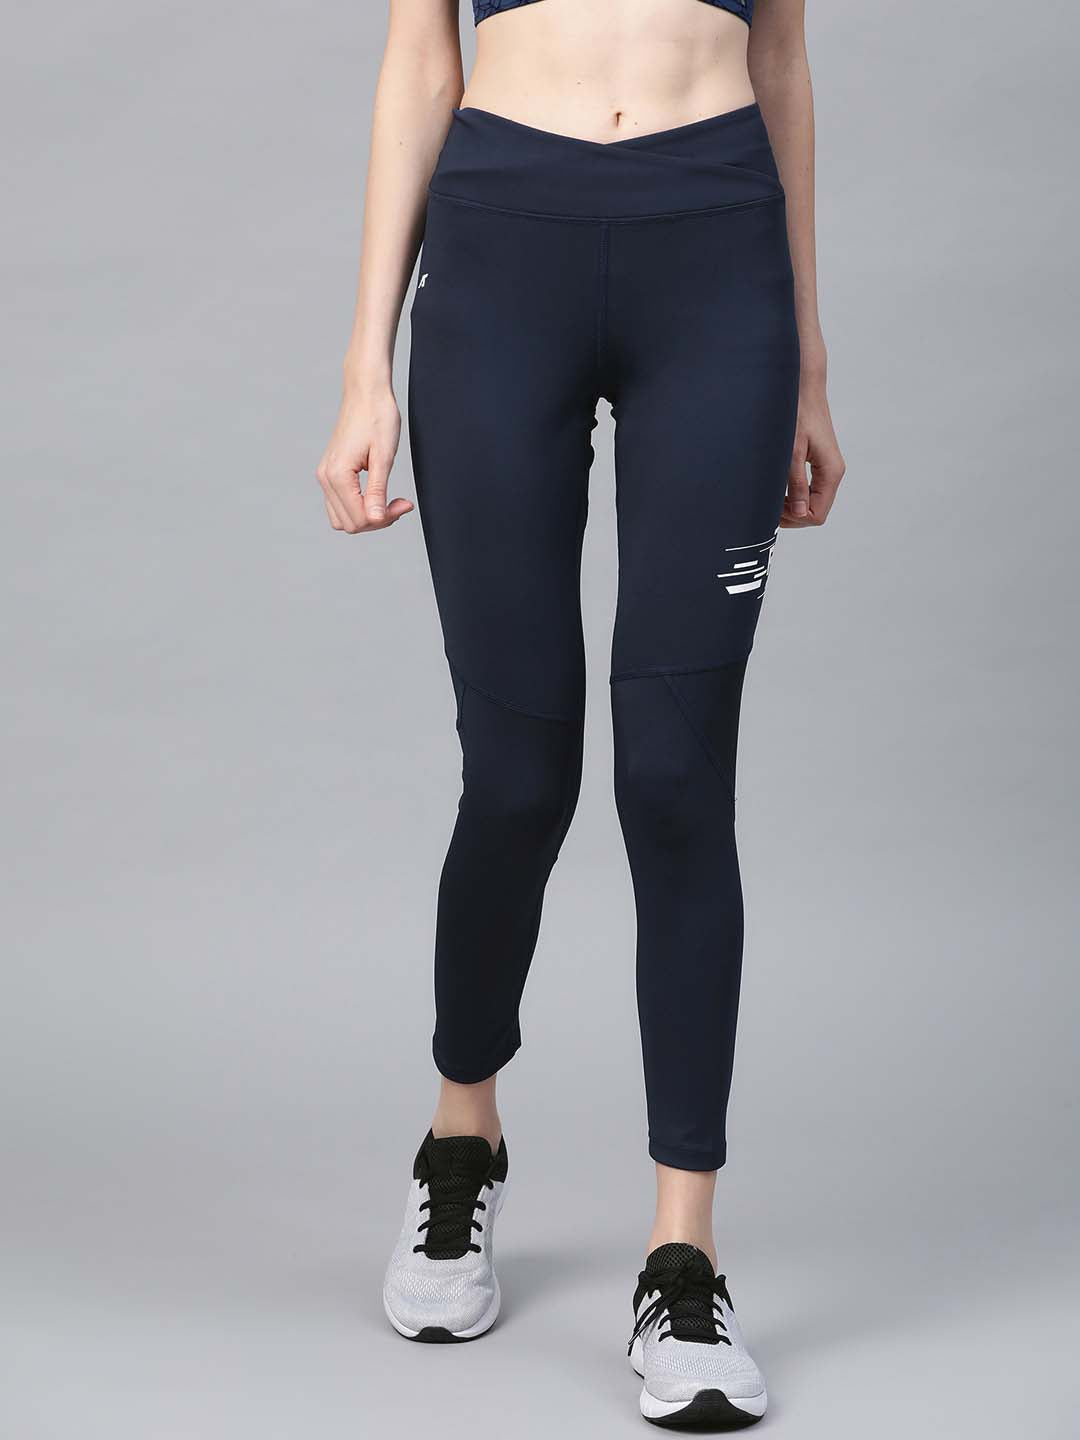 Alcis Women Navy Blue Secure Fit Solid Cropped Training Tights